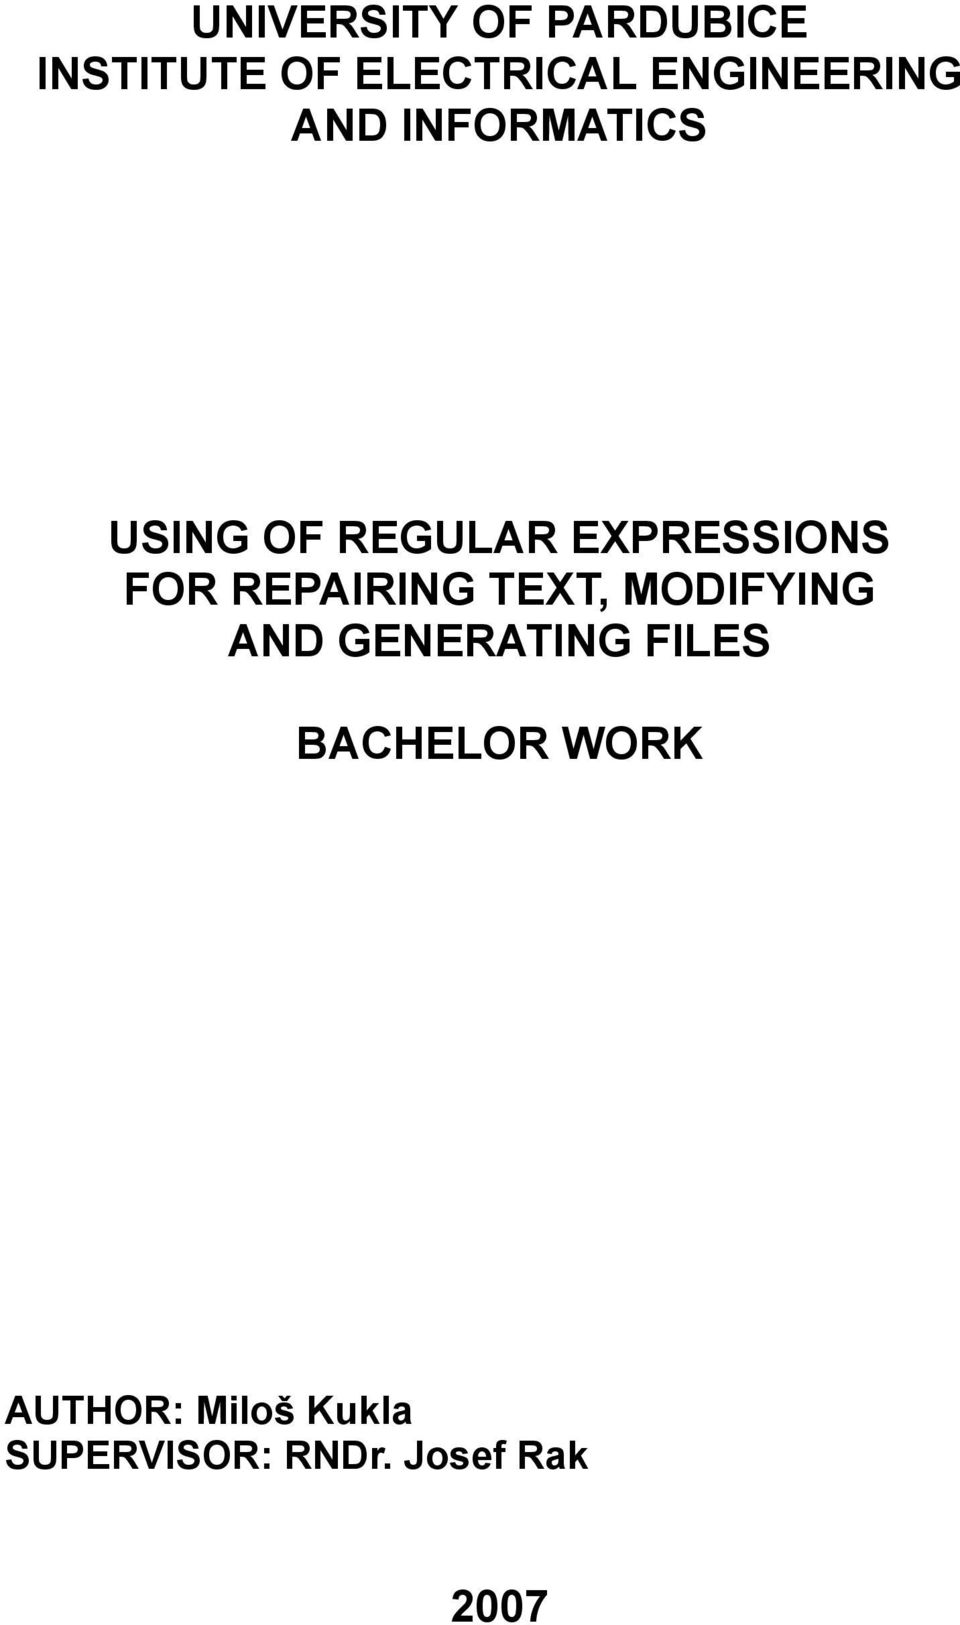 EXPRESSIONS FOR REPAIRING TEXT, MODIFYING AND